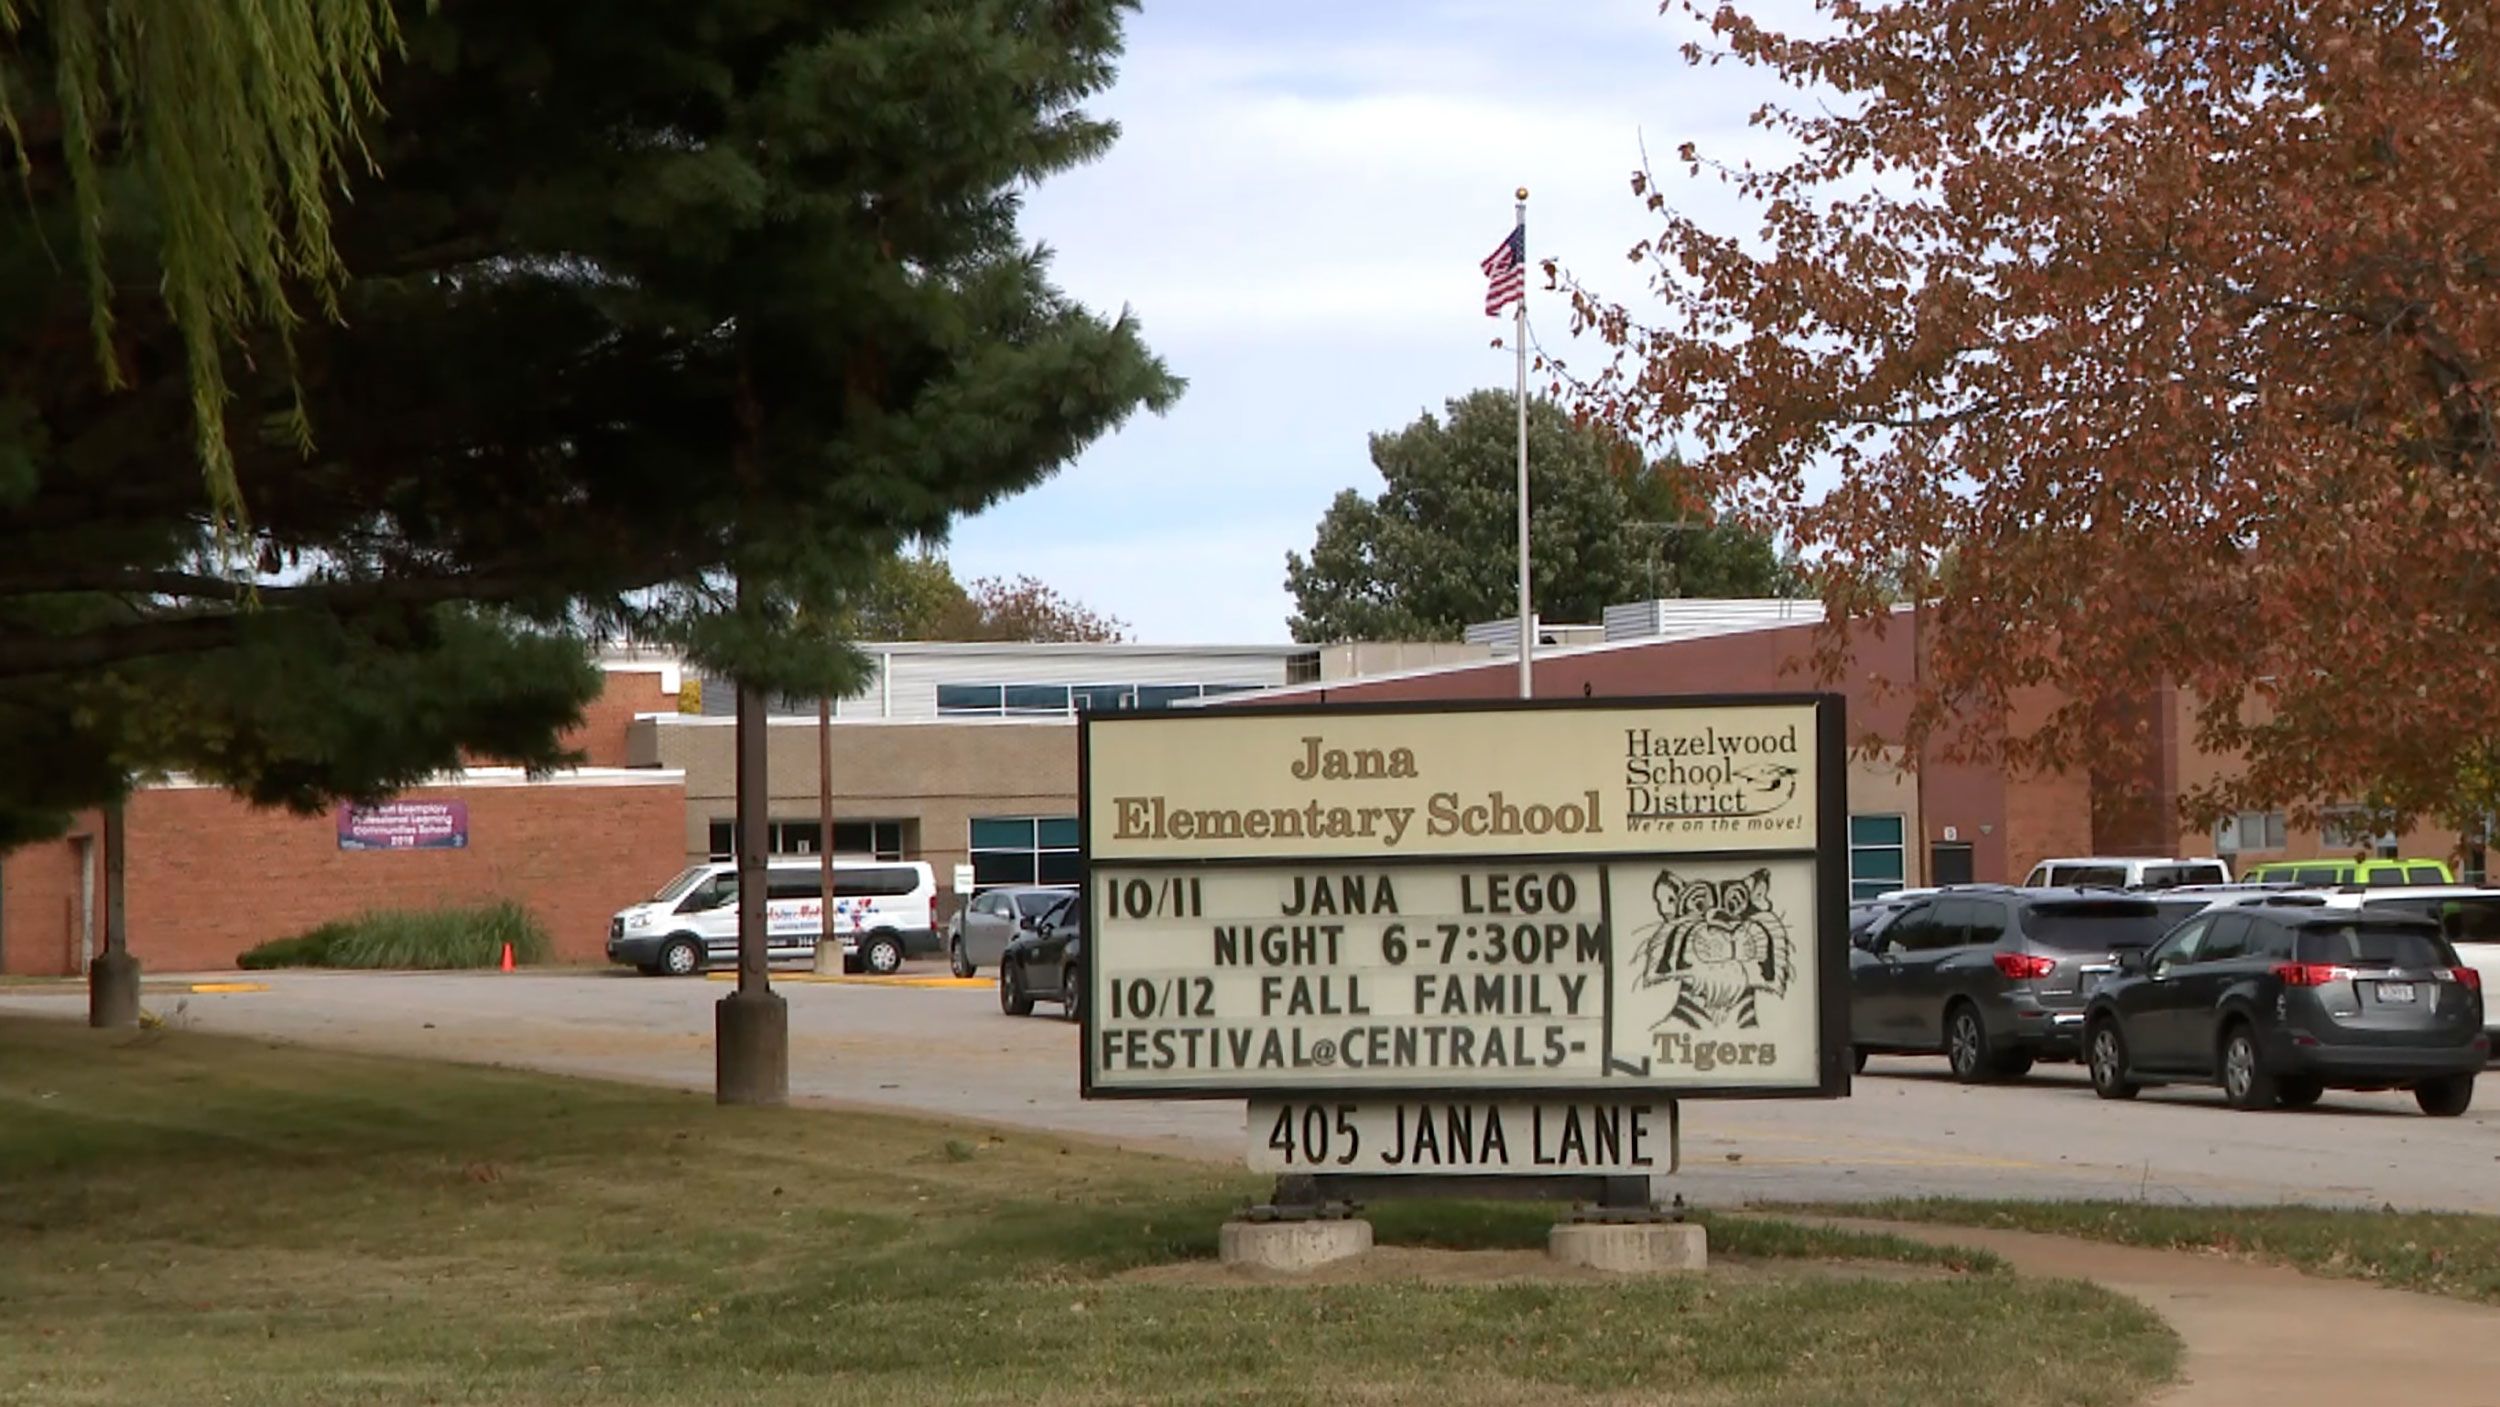 Radioactive material found at Missouri elementary school more than